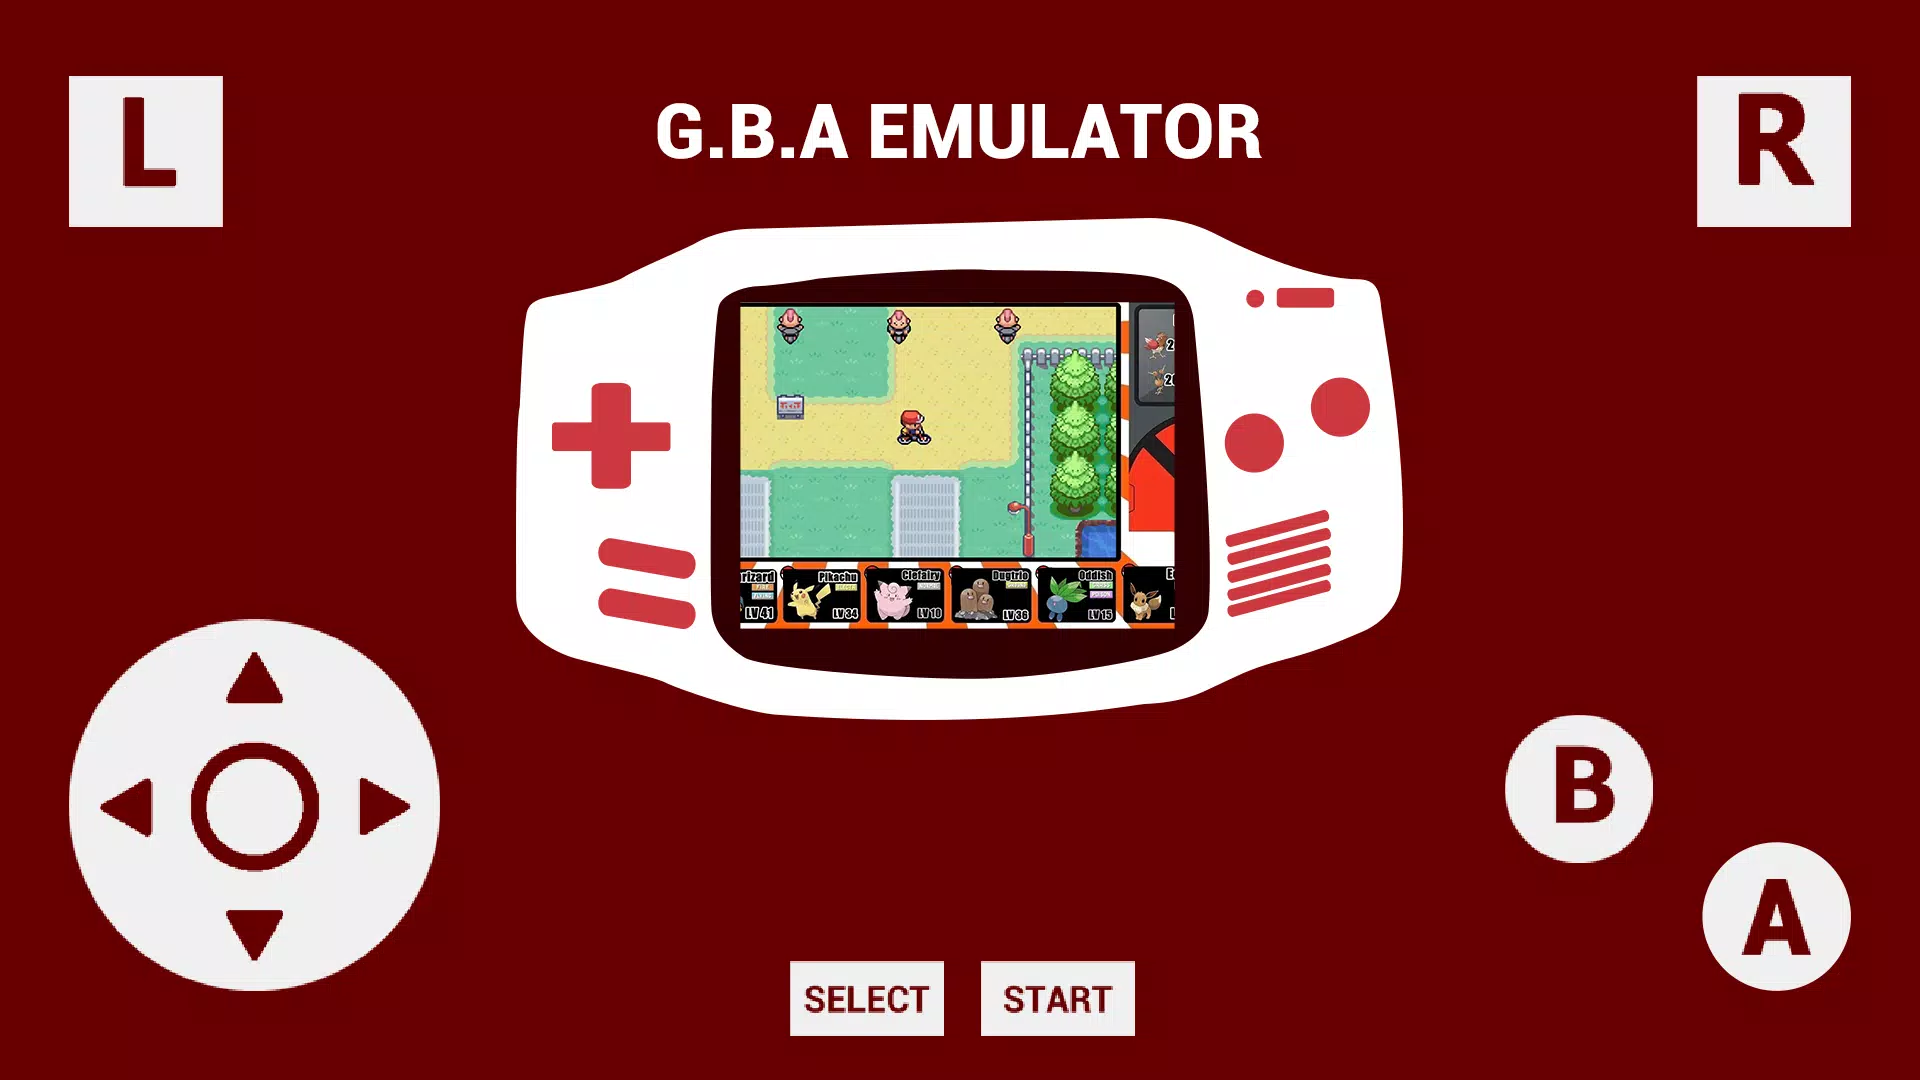 APK GBA Emulator for Android - Download